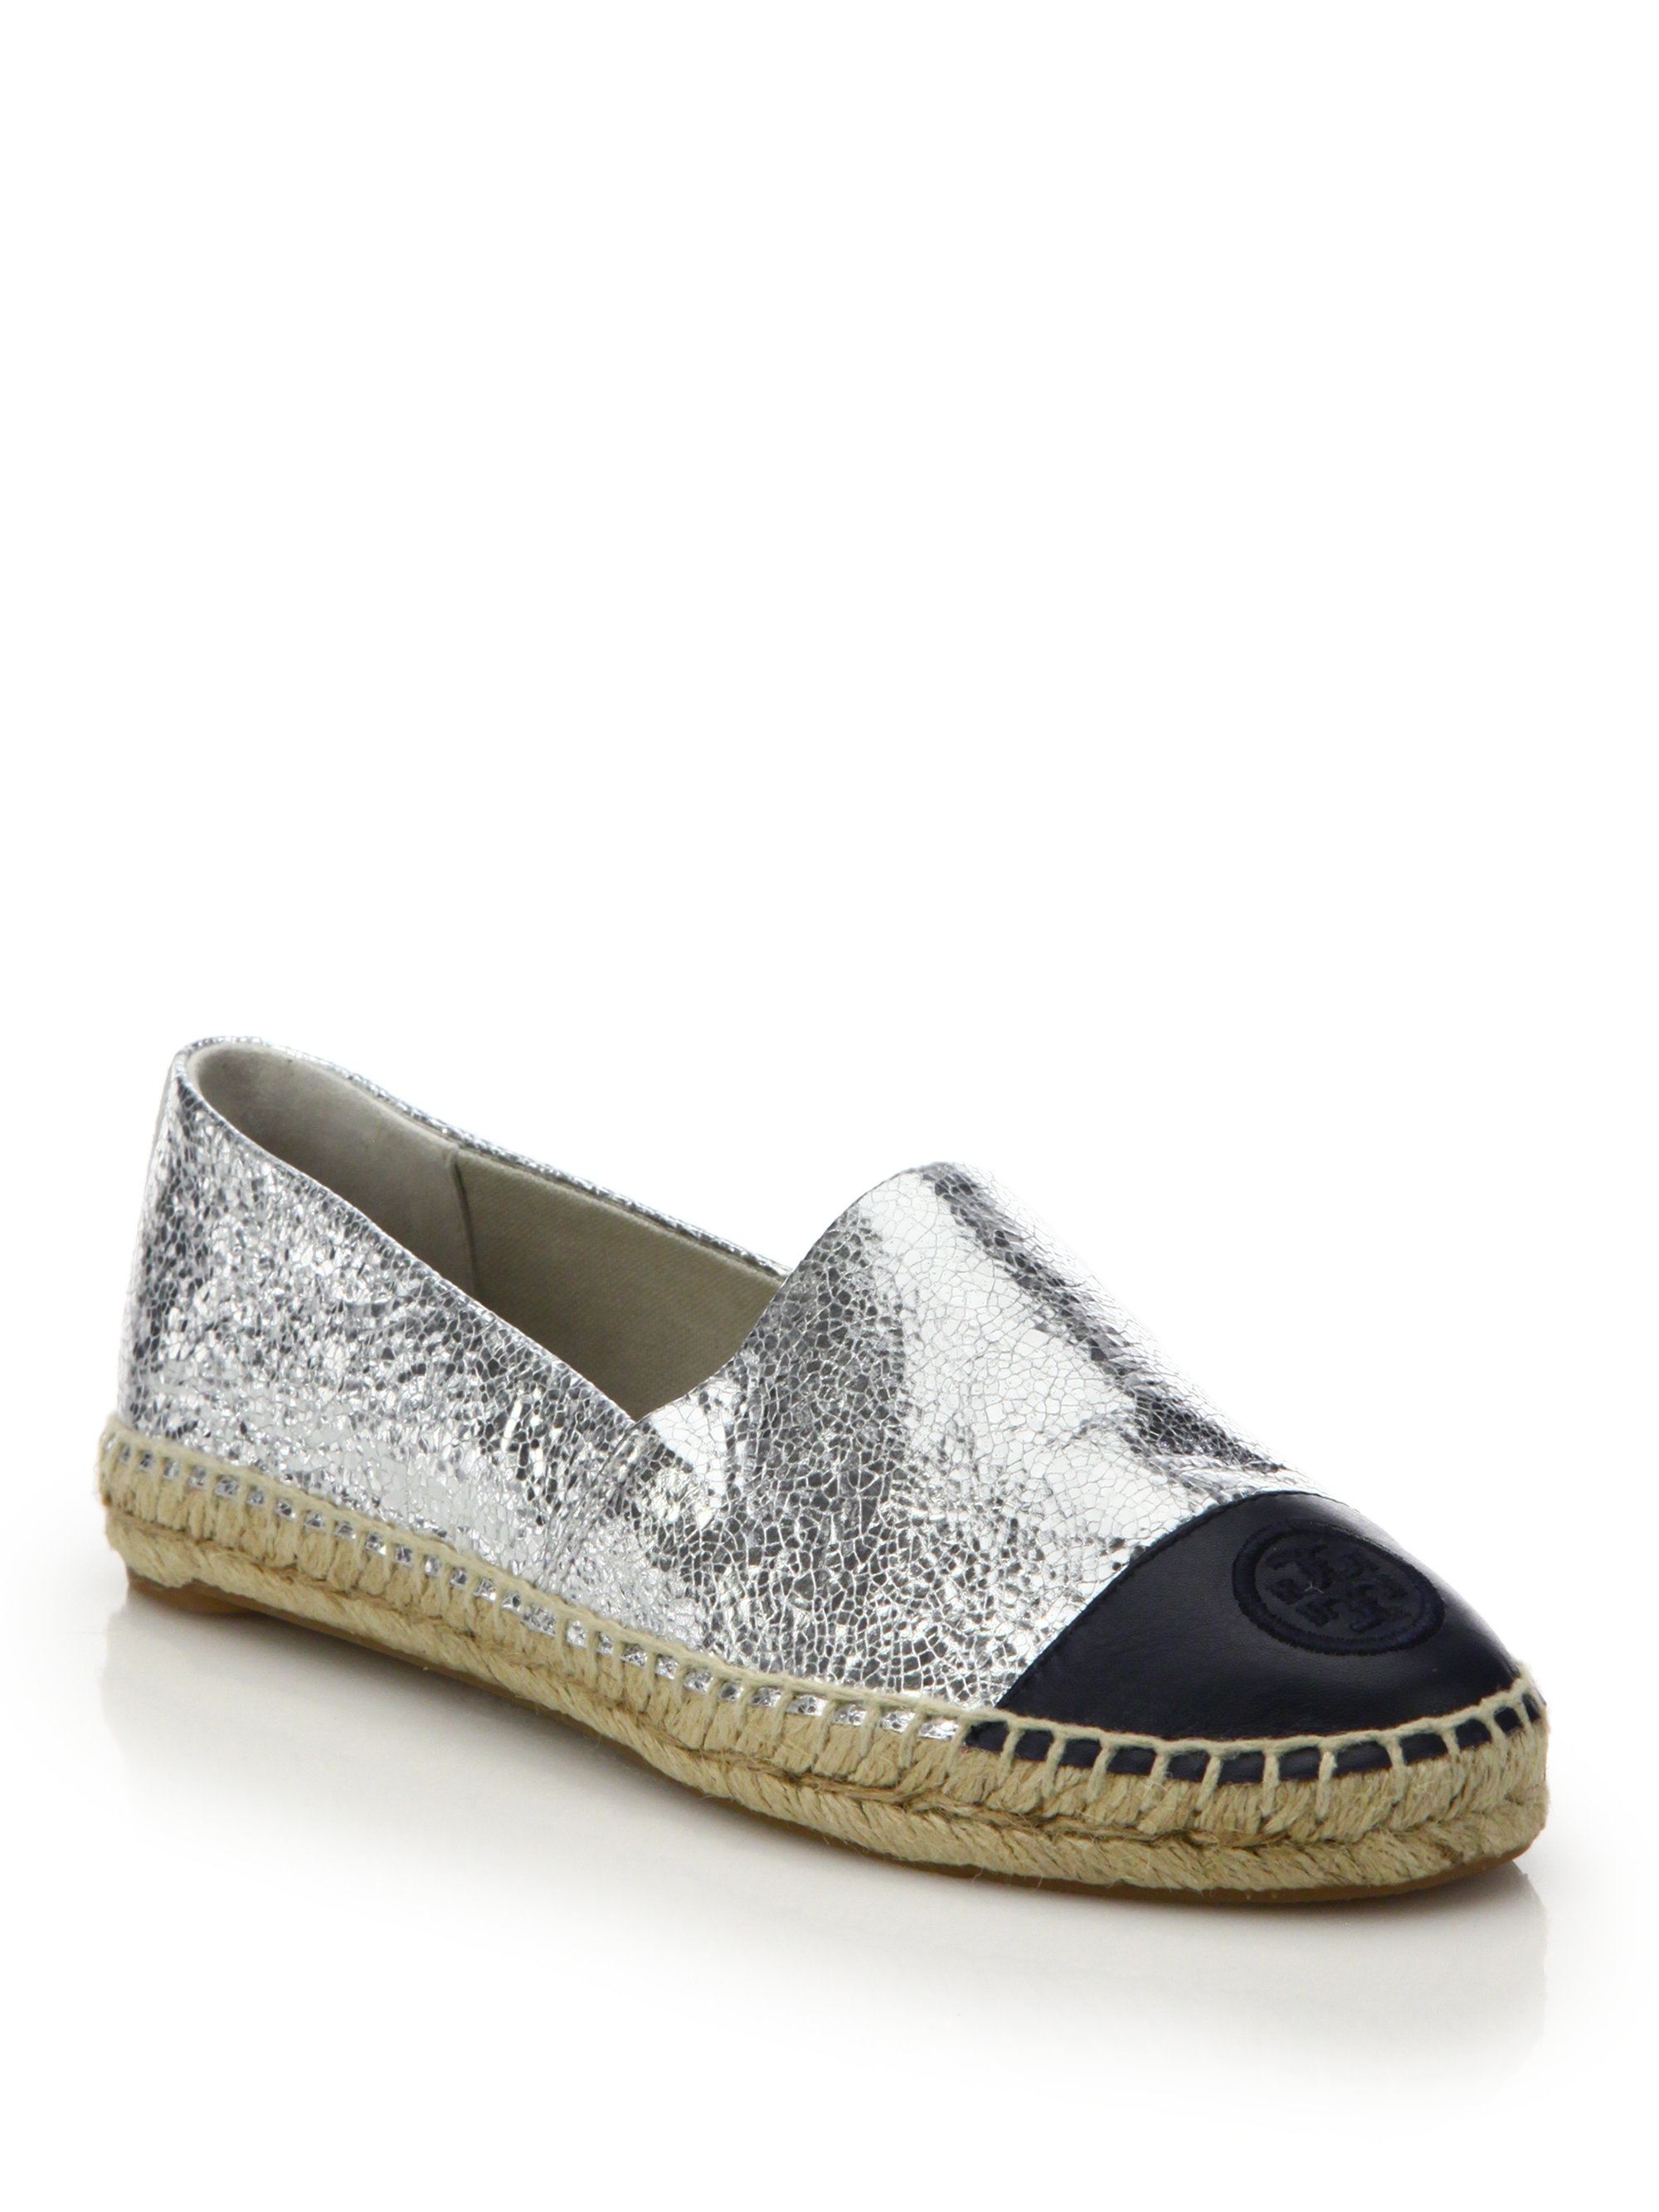 tory burch silver shoes